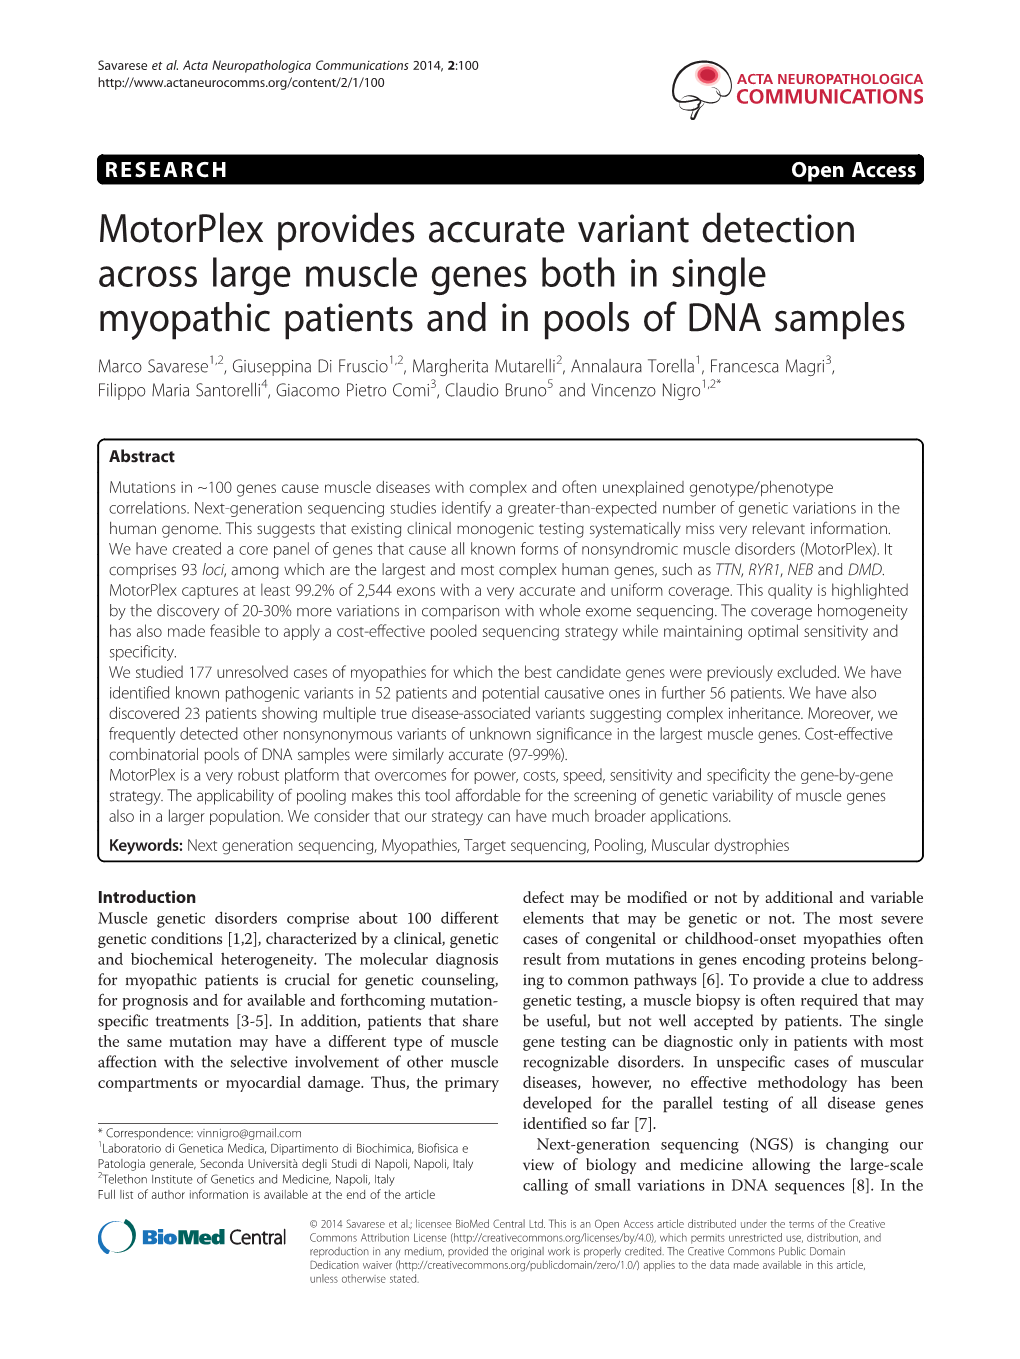 Motorplex Provides Accurate Variant Detection Across Large Muscle